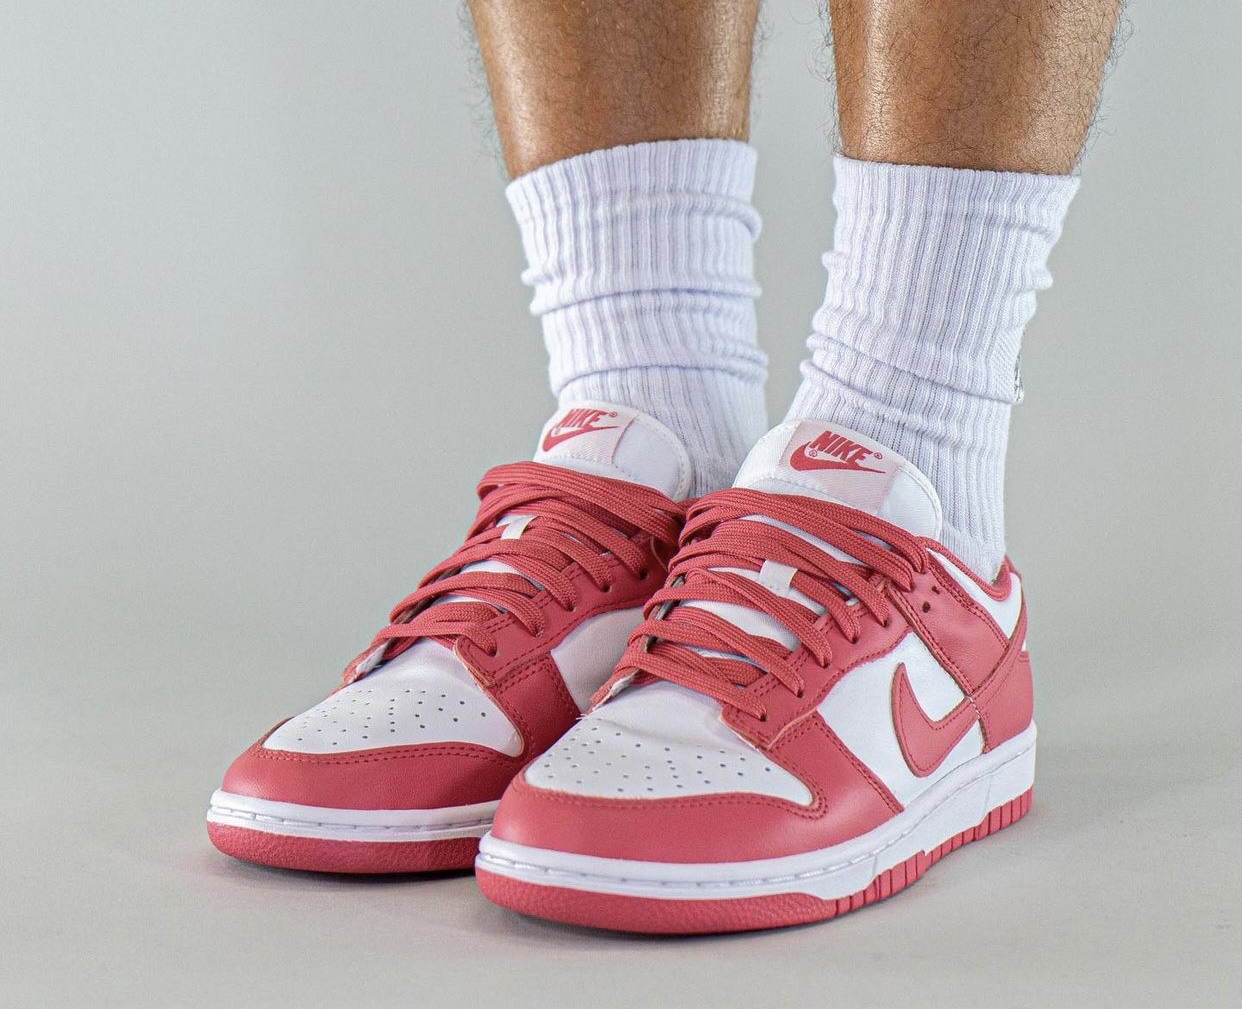 Nike Dunk Low Archeo Pink White DD1503 111 Release Date